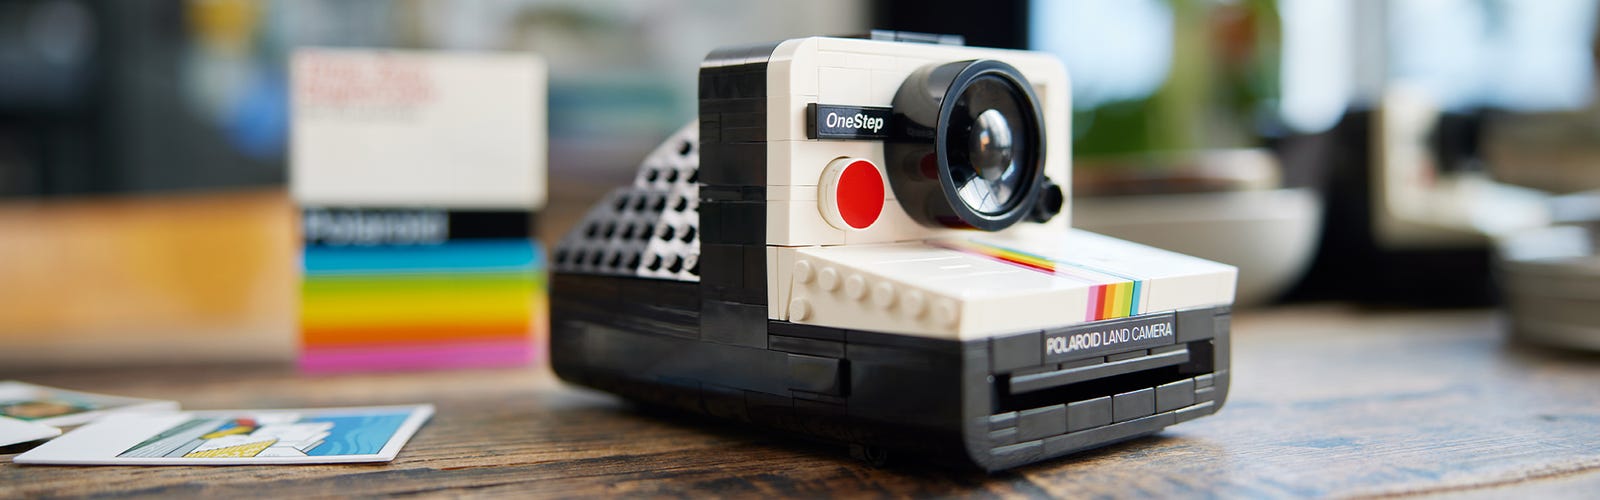 Review: The new LEGO® Polaroid Camera is perfect – except for one thing